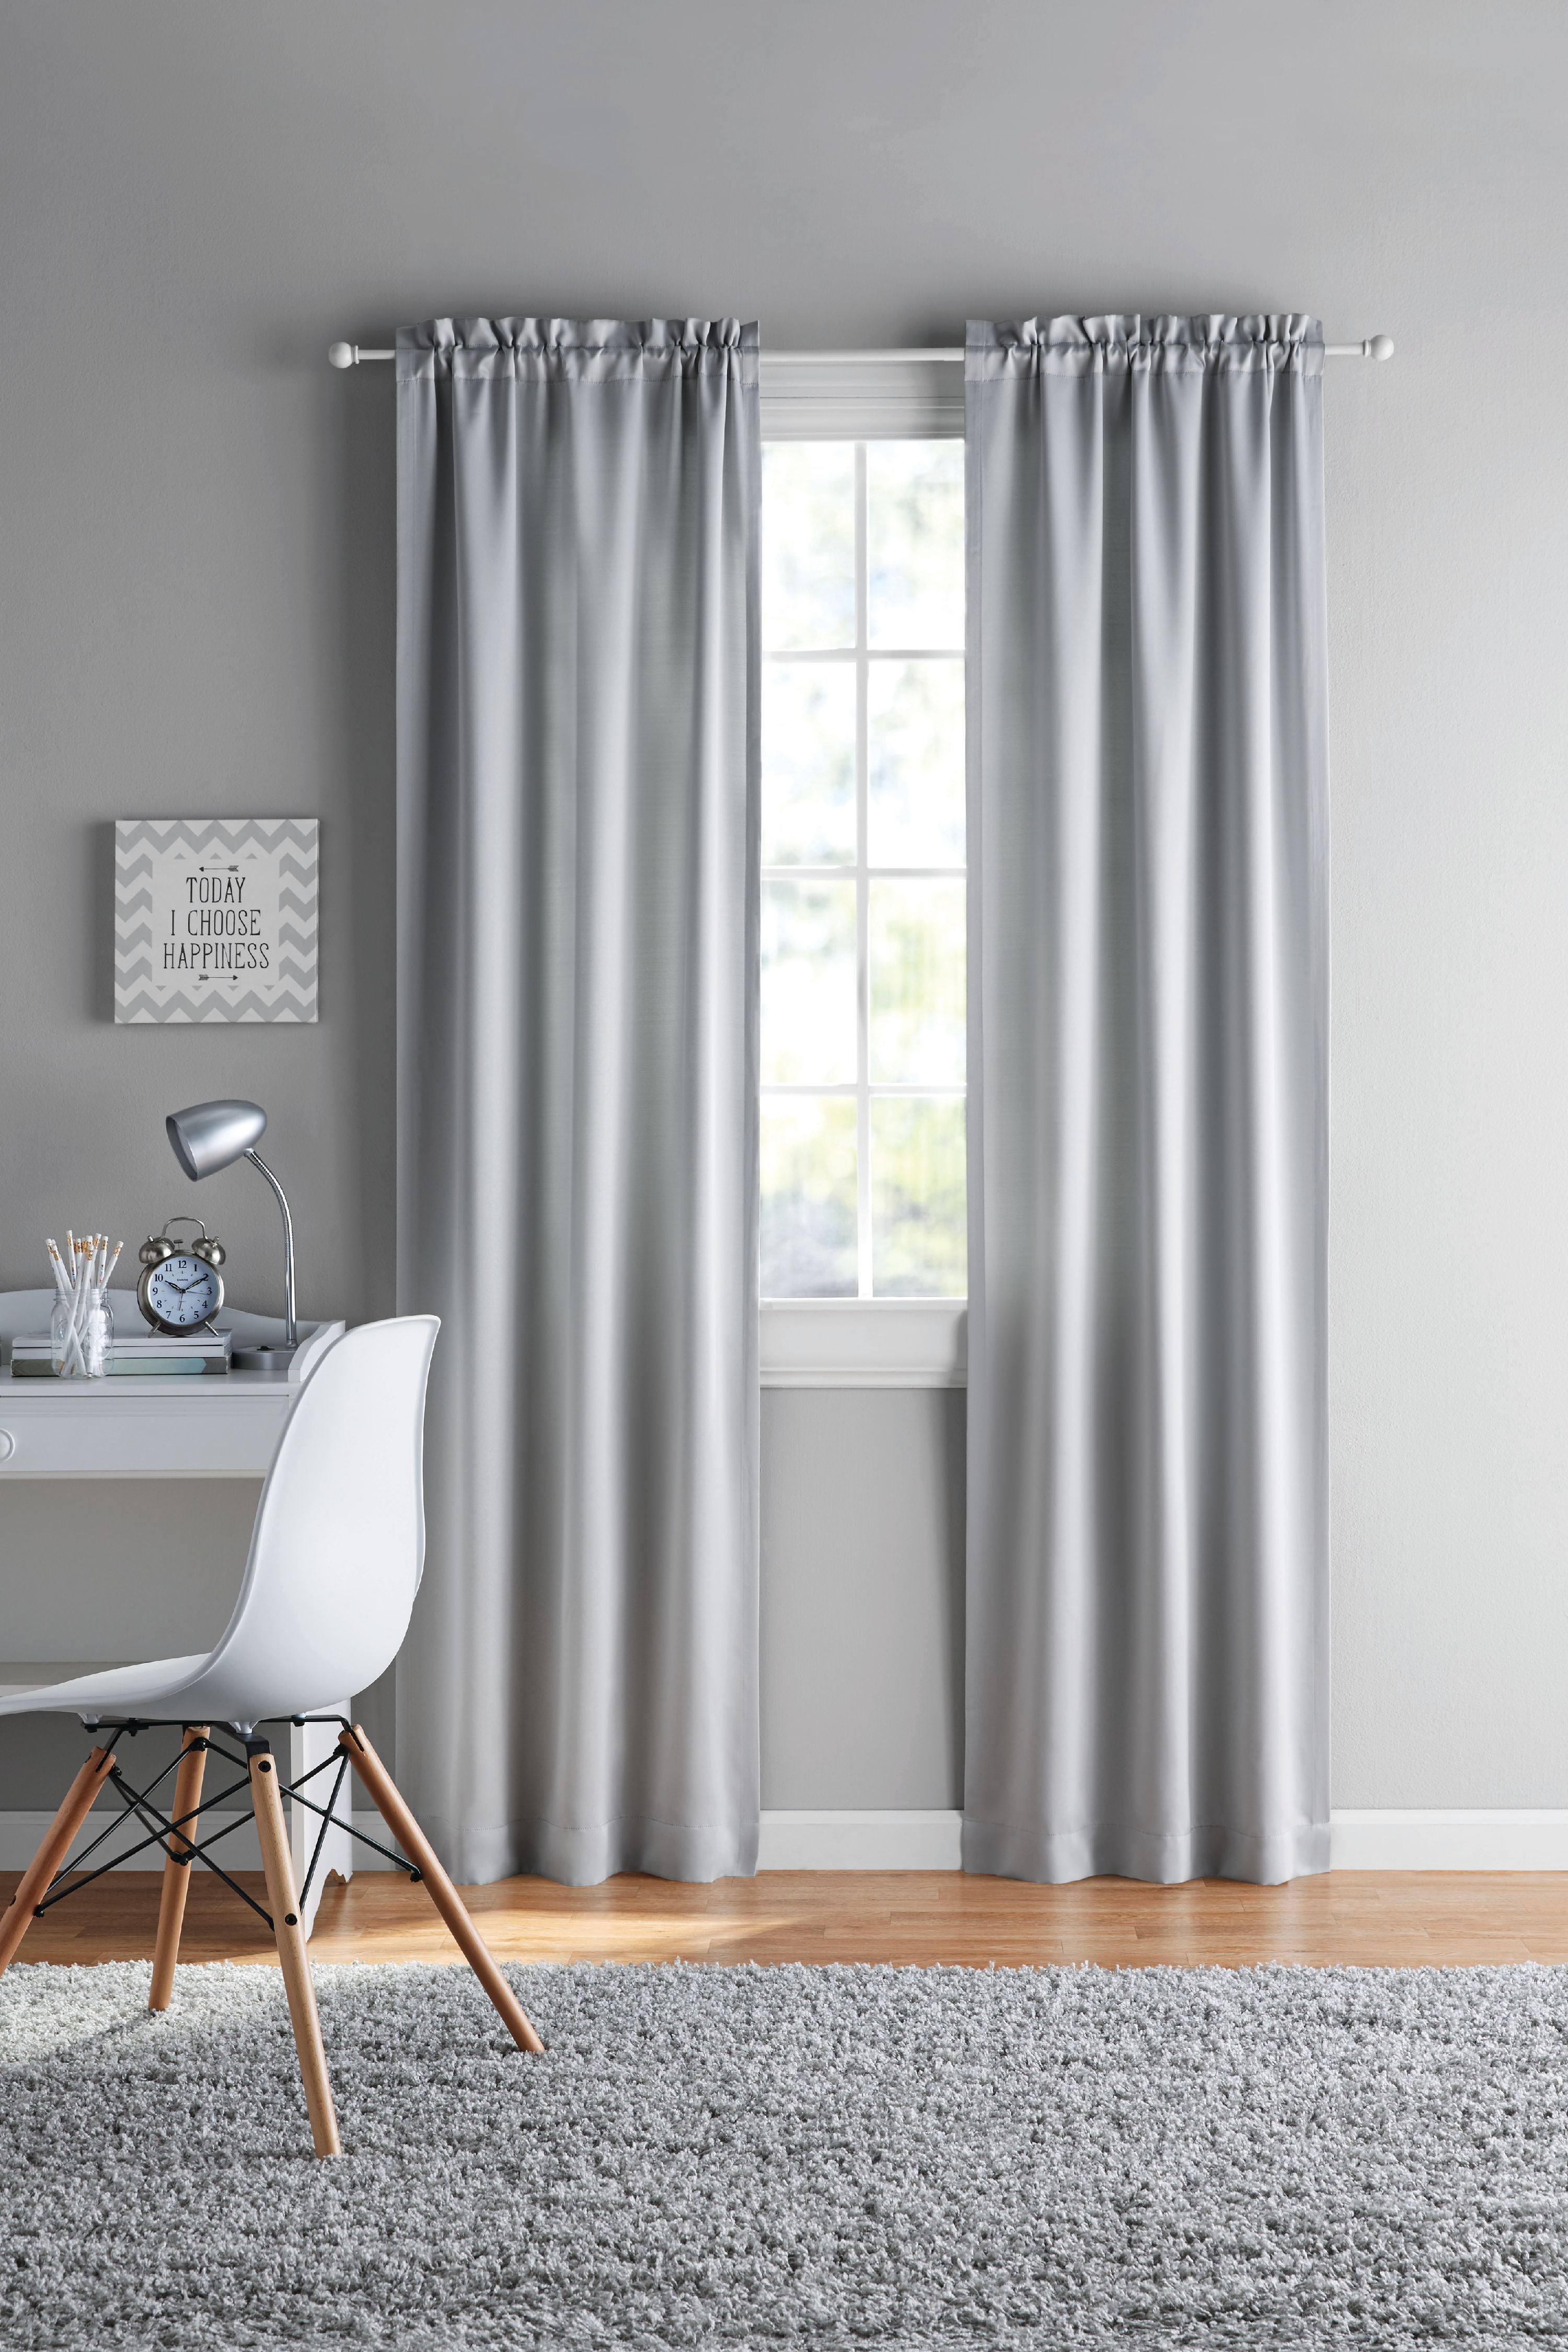 Your Zone Solid Color Room Darkening Rod Pocket Curtain Panel Pair, Set of 2, Silver, 30 x 84